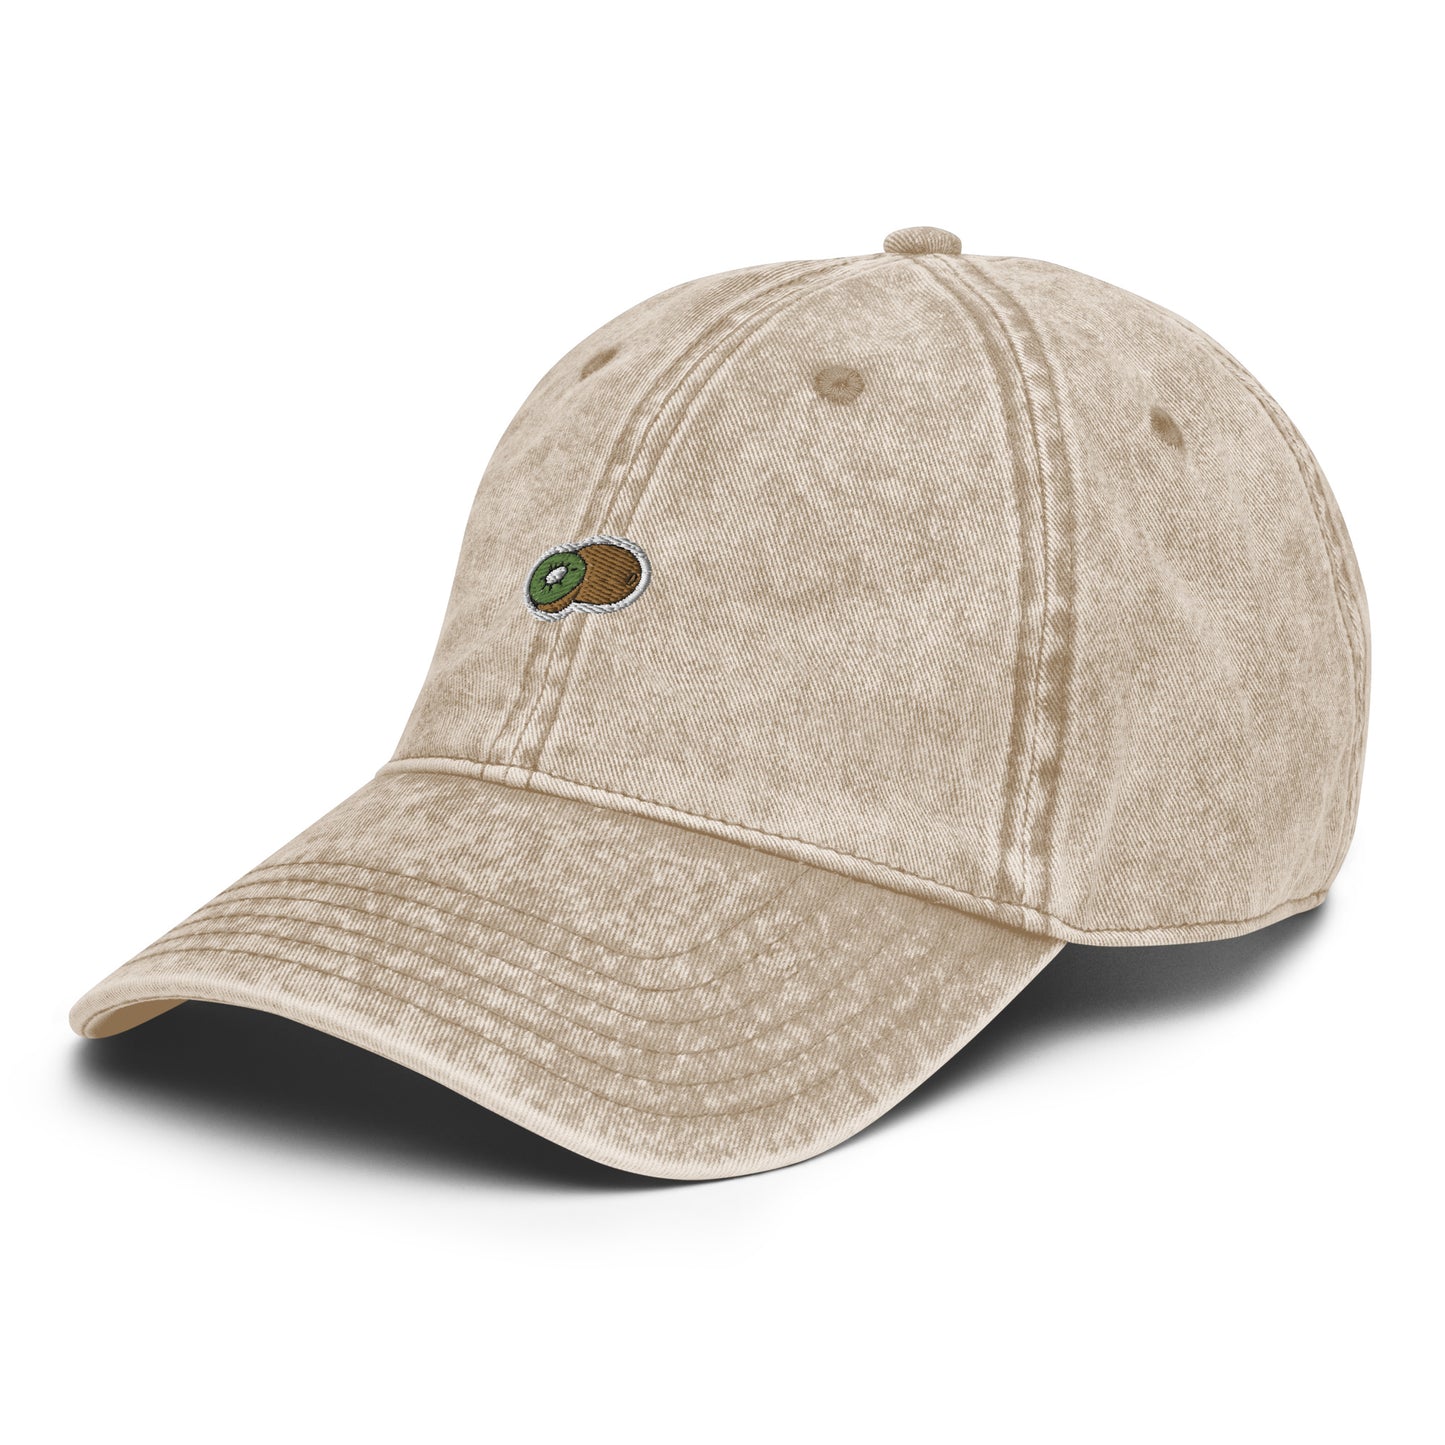 cap-from-the-front-with-kiwi-symbol